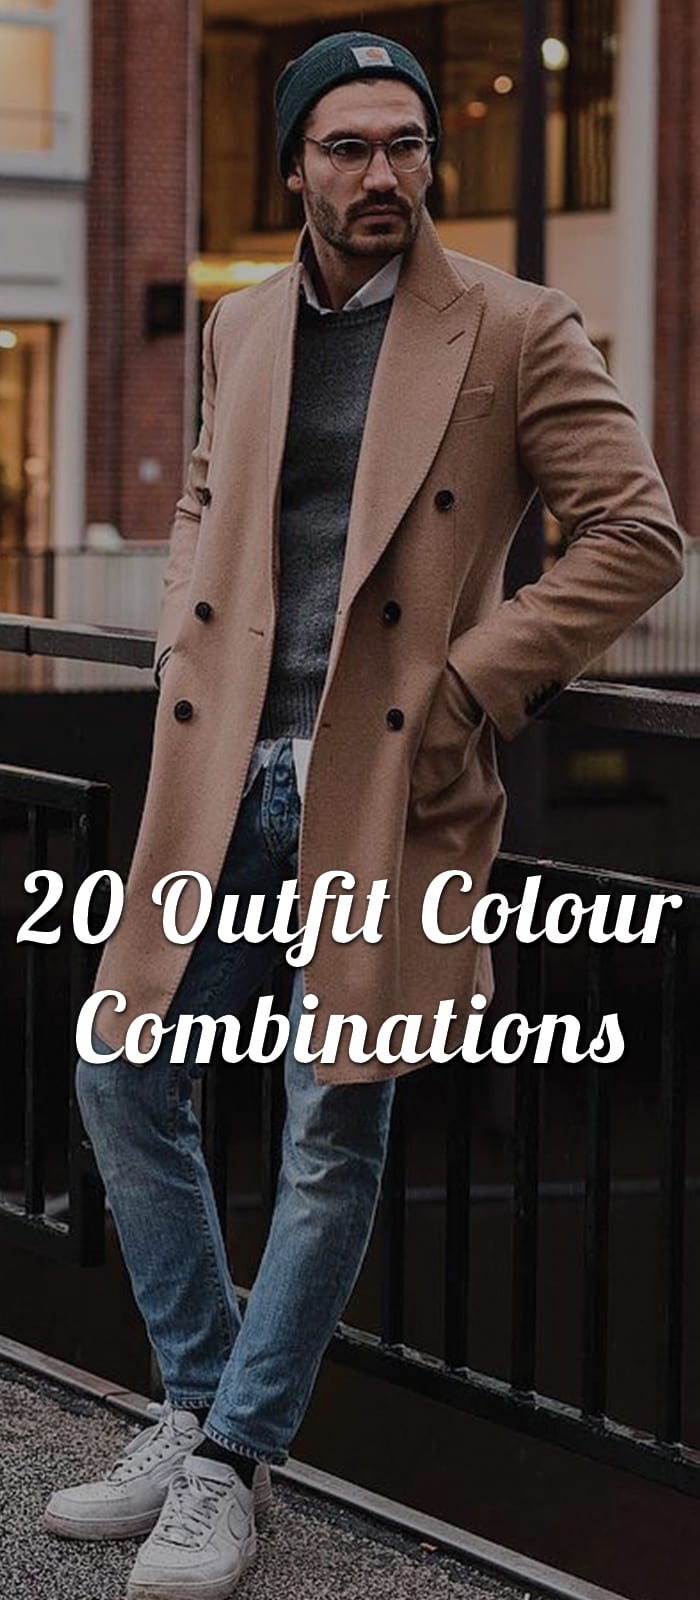 Outfit-Colour-Combinations